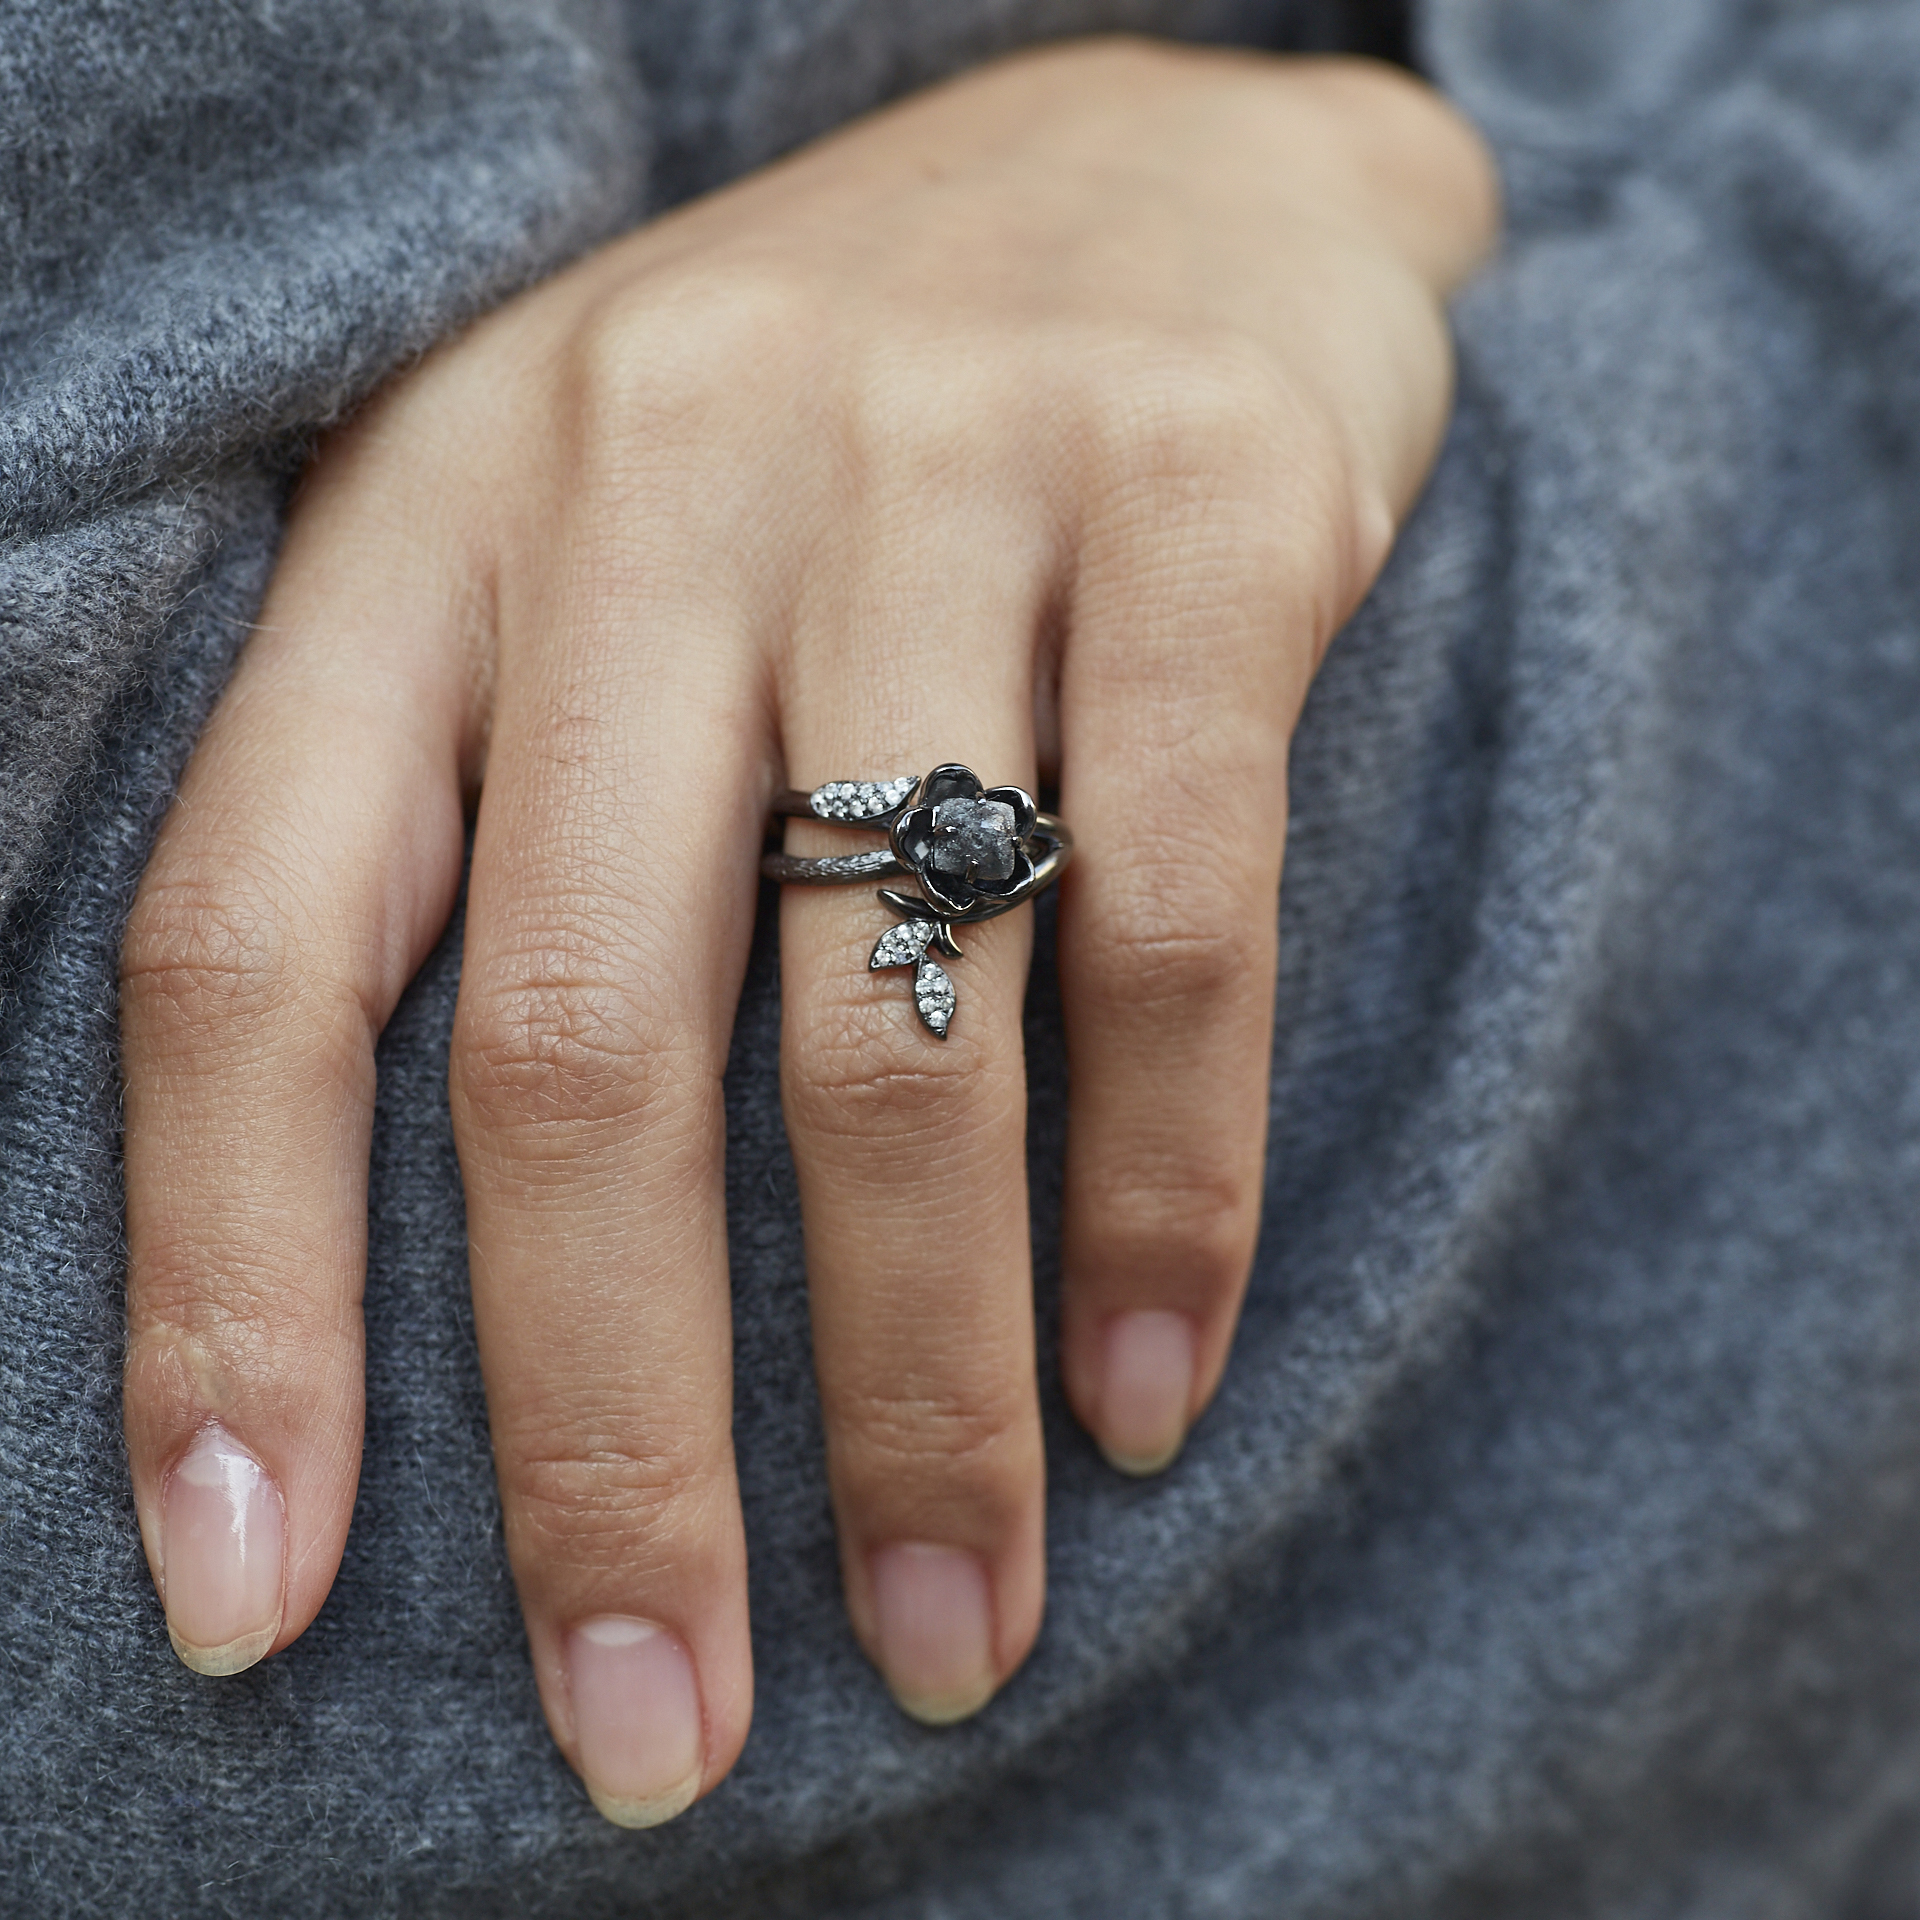 How to Wear Rings on Both Hands and Keep It Classy (The Ultimate Guide)